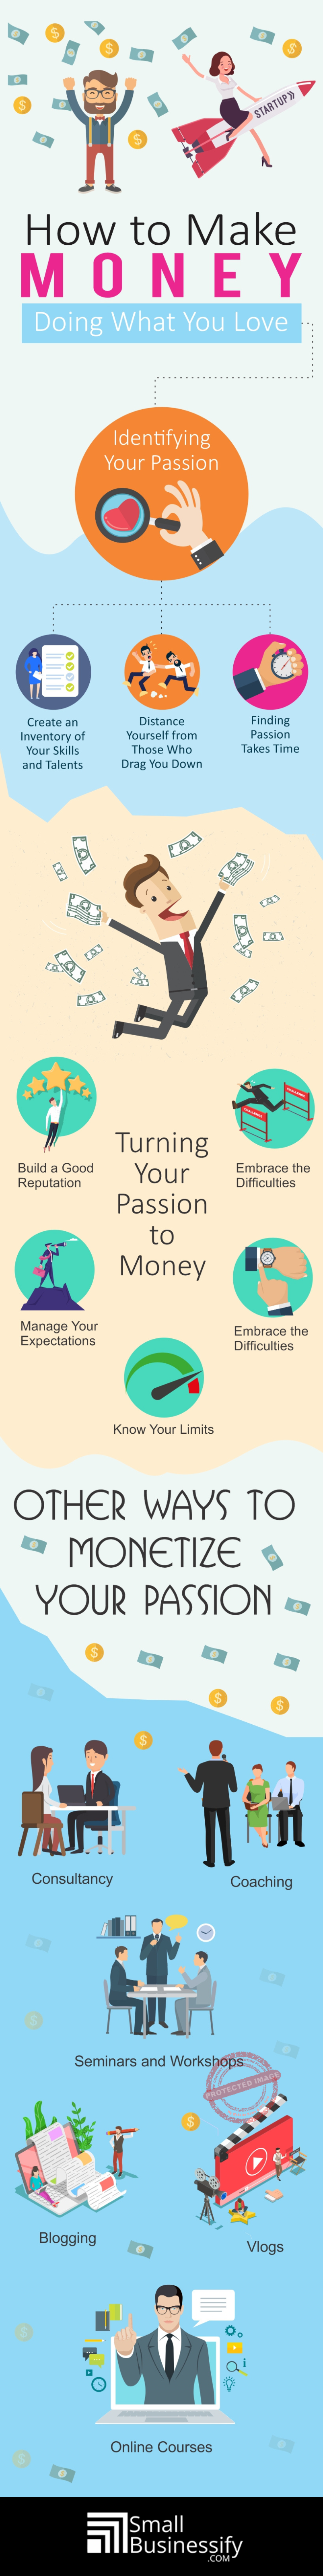 How to make money doing what you love infographic